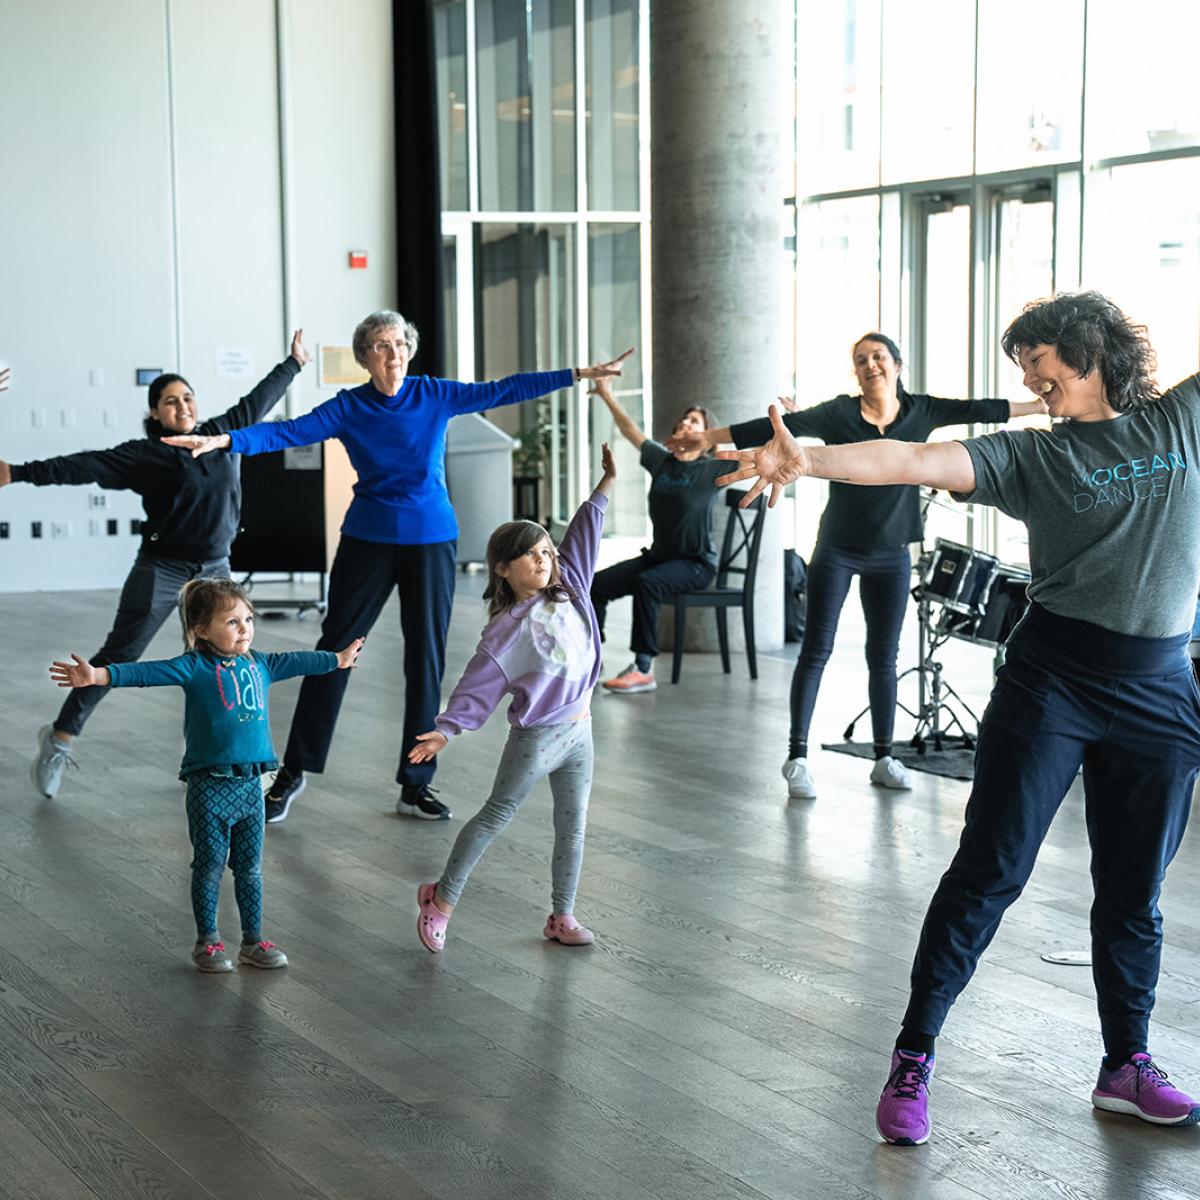 An intergenerational group stand in a well light room with arms outstretched reaching in a wide start smiling taking part in a public dance class